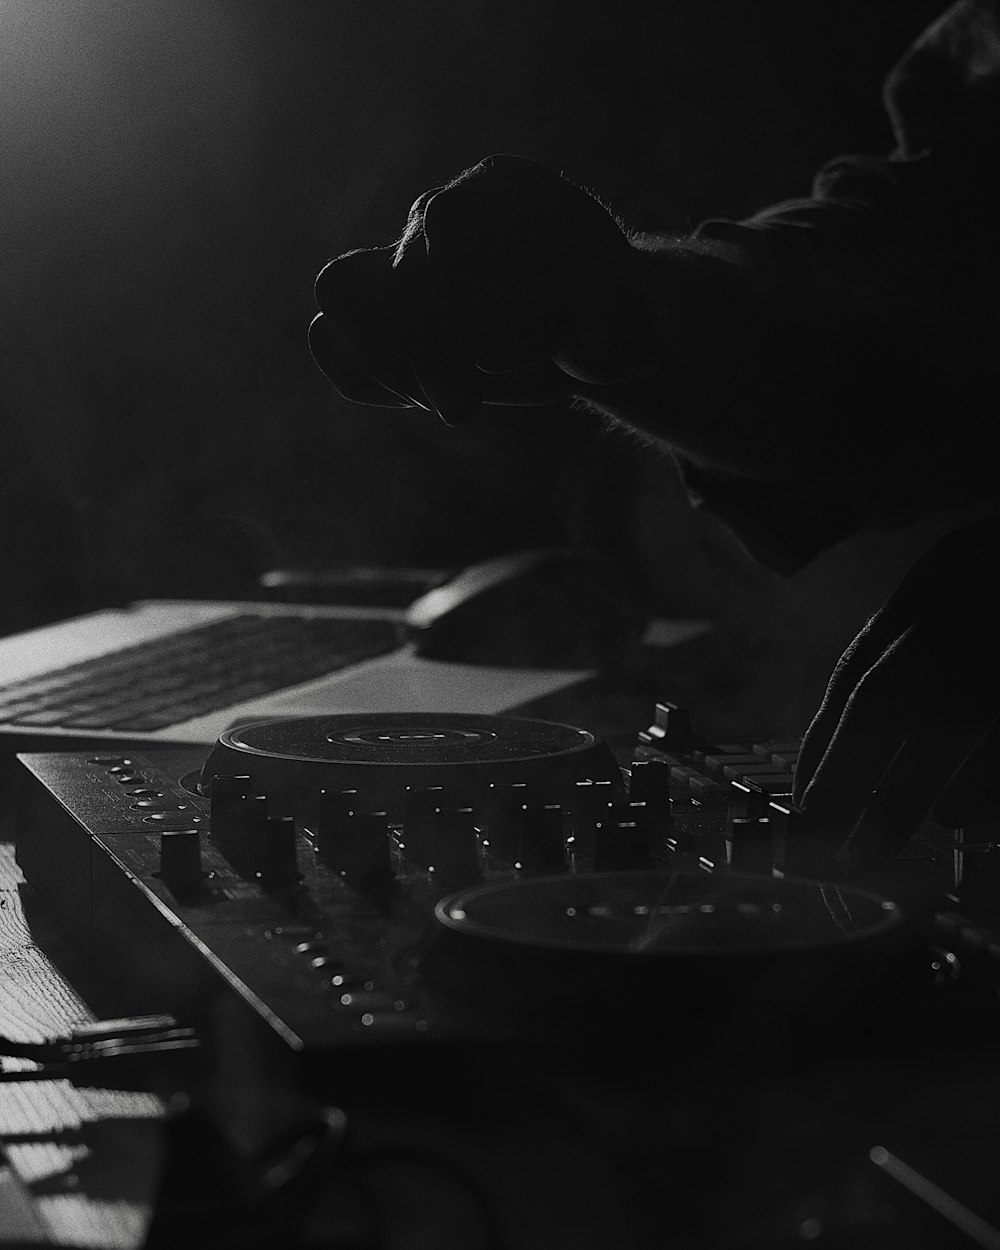 grayscale photo of person playing dj mixer